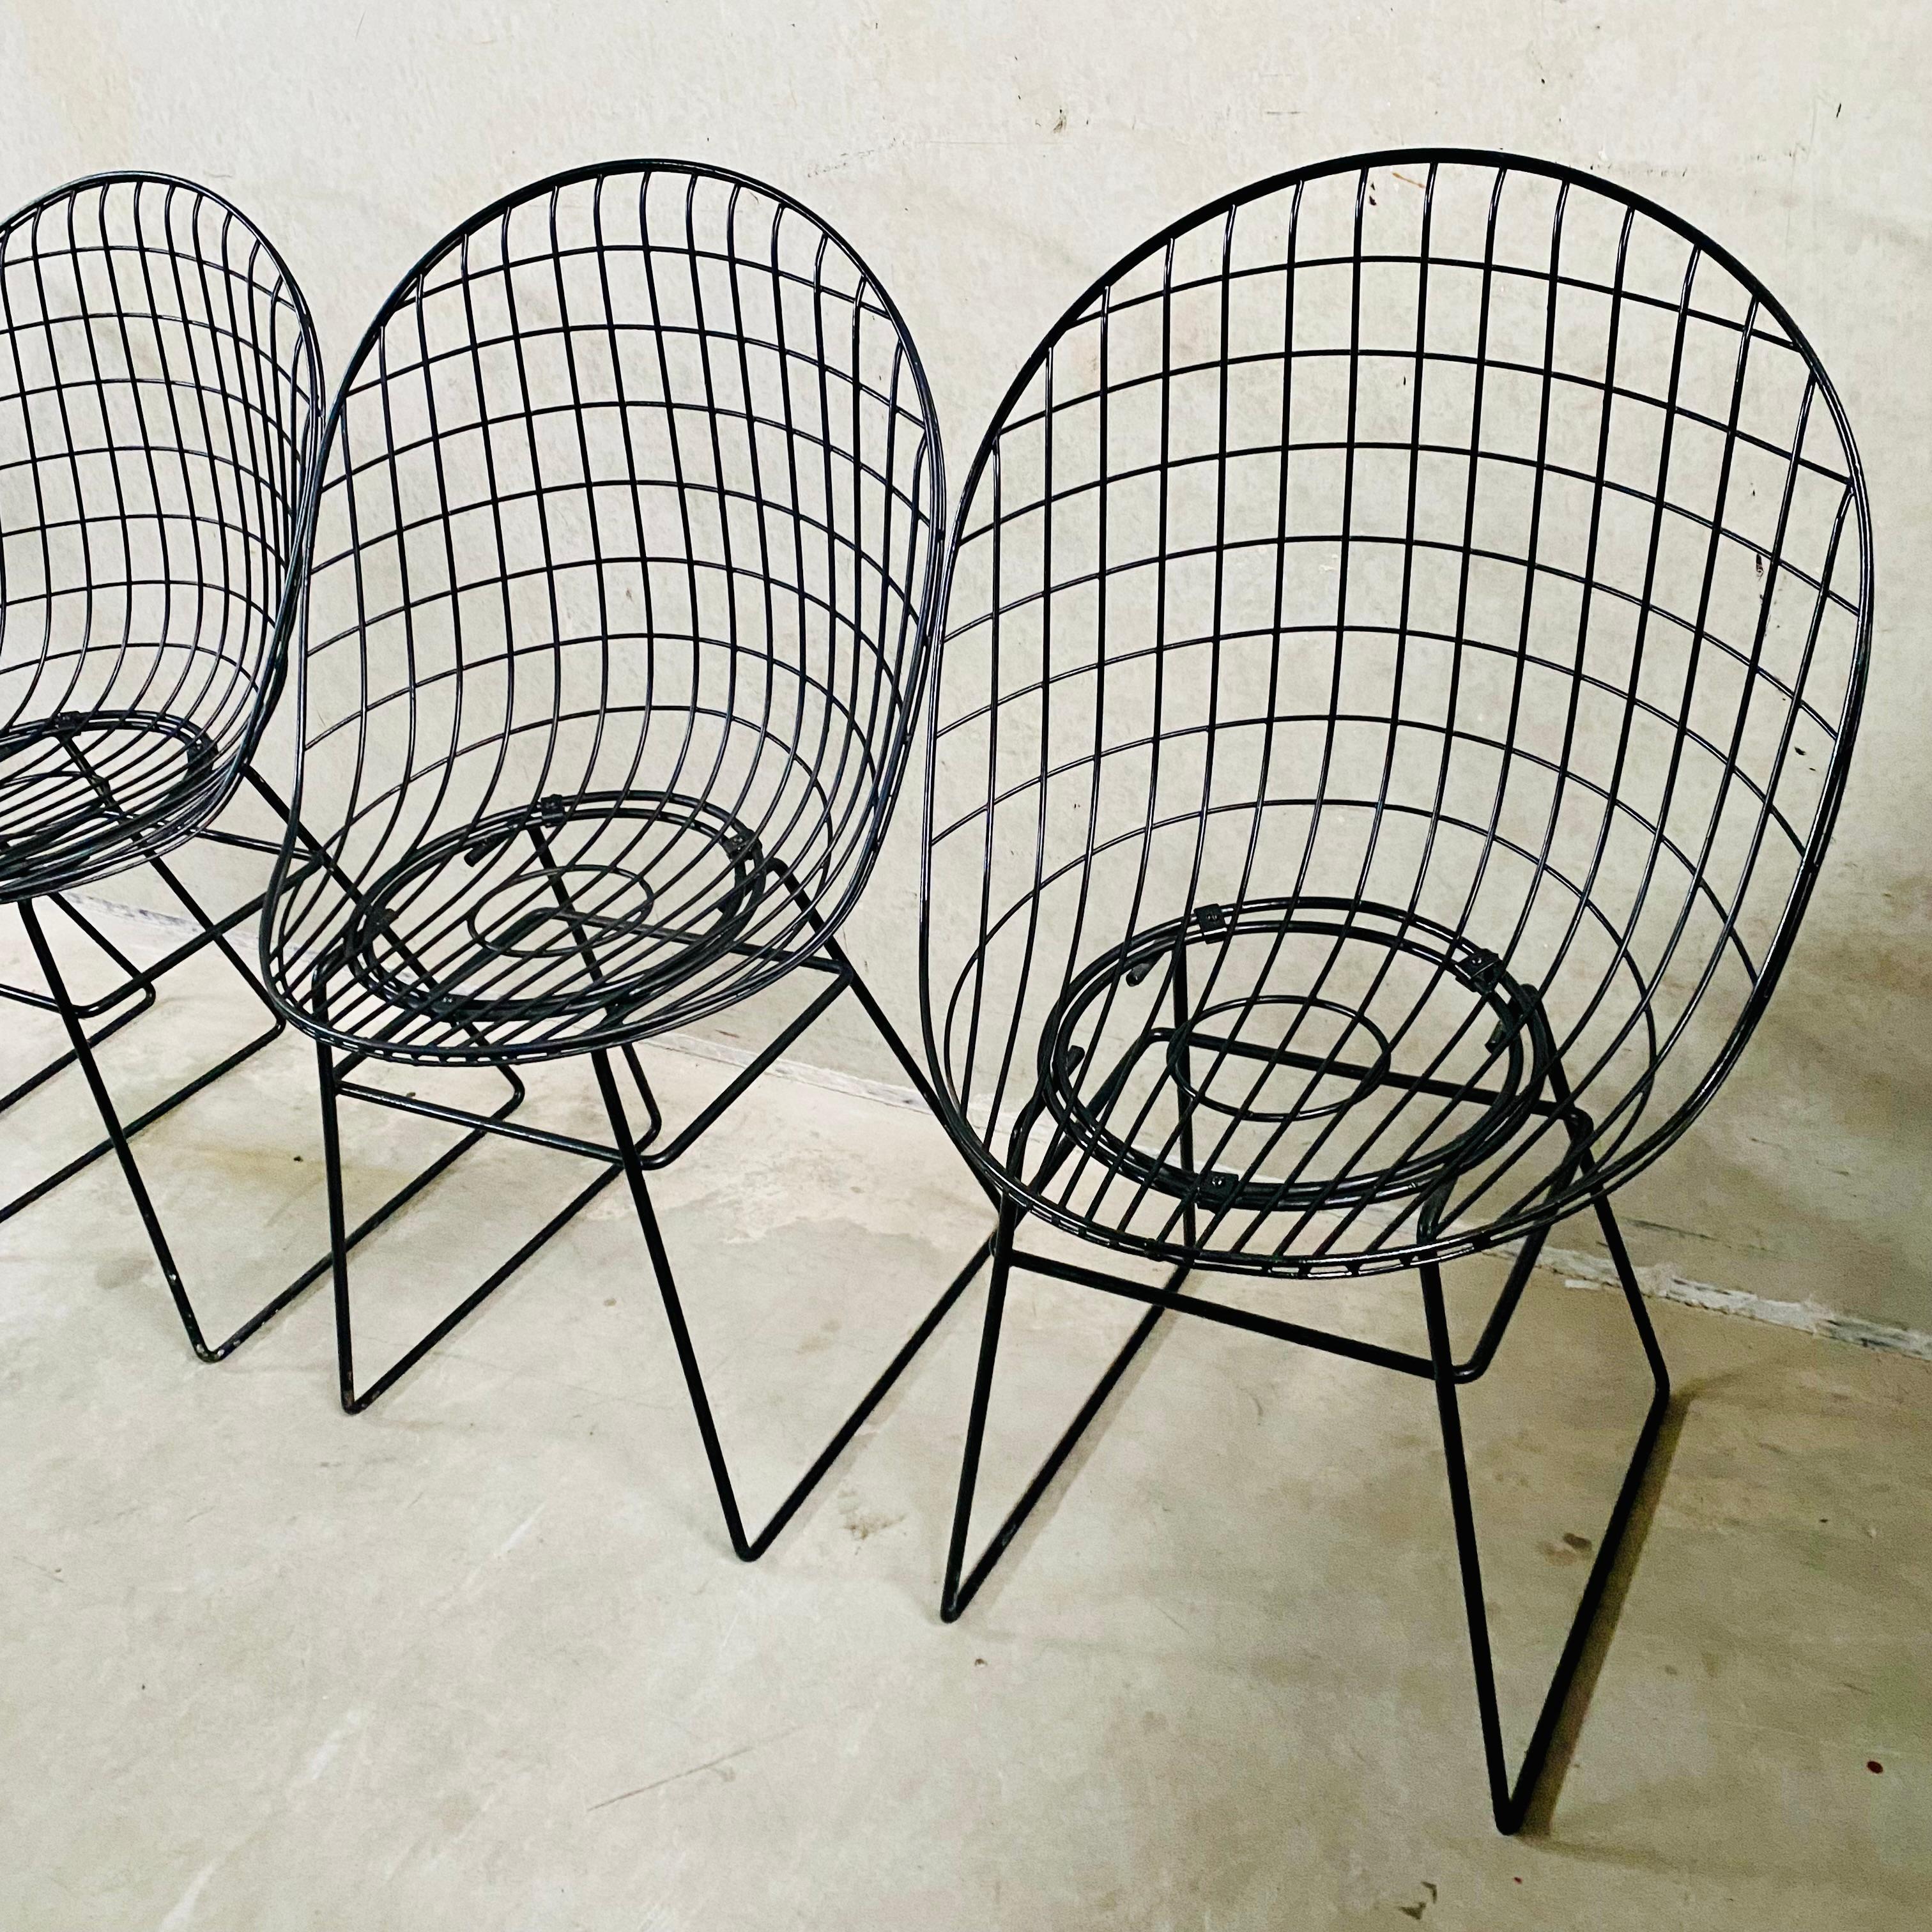 4 Early Edition Wire Chairs by Cees Braakman & A. Dekker for UMS Pastoe, 1950 For Sale 9